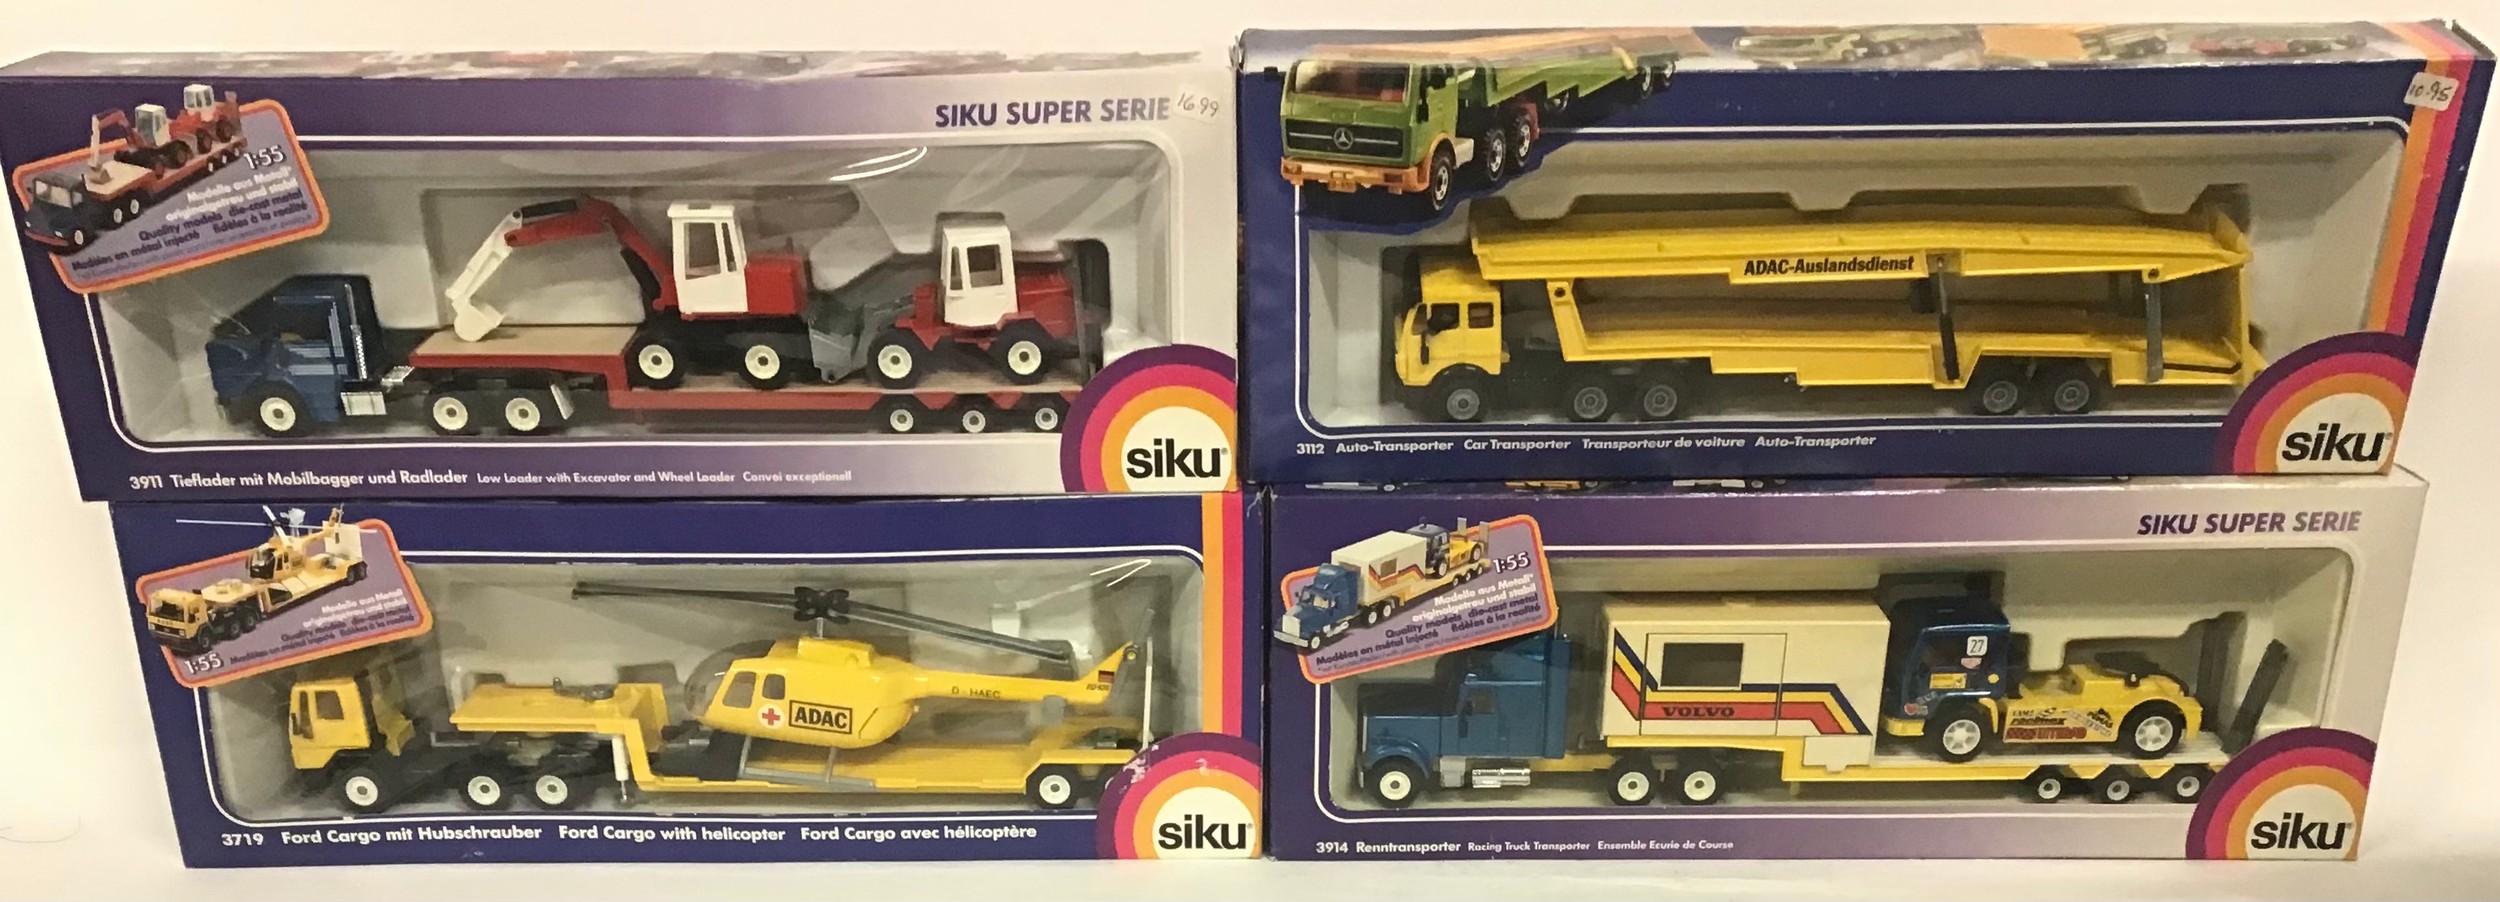 Siku boxed group to include 3914 Racing Truck Transporter, 3911 Low Loader with Excavator and